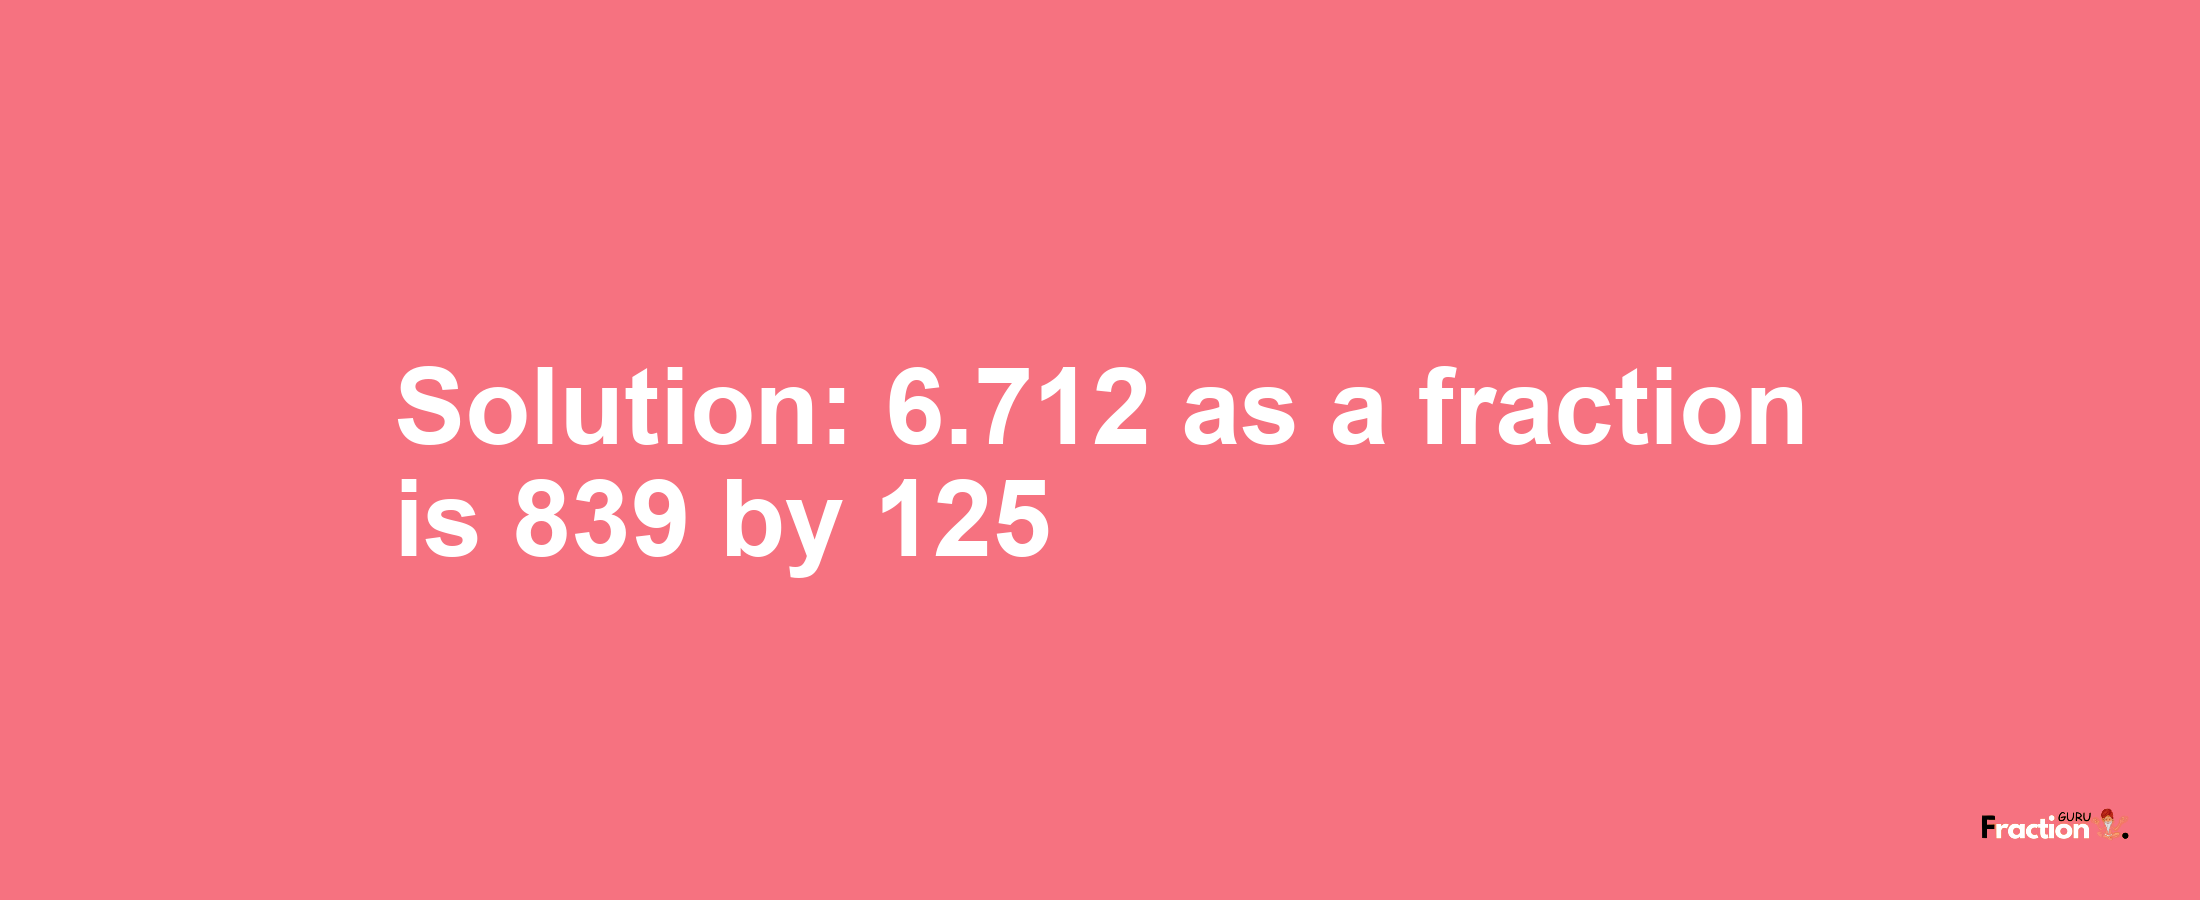 Solution:6.712 as a fraction is 839/125